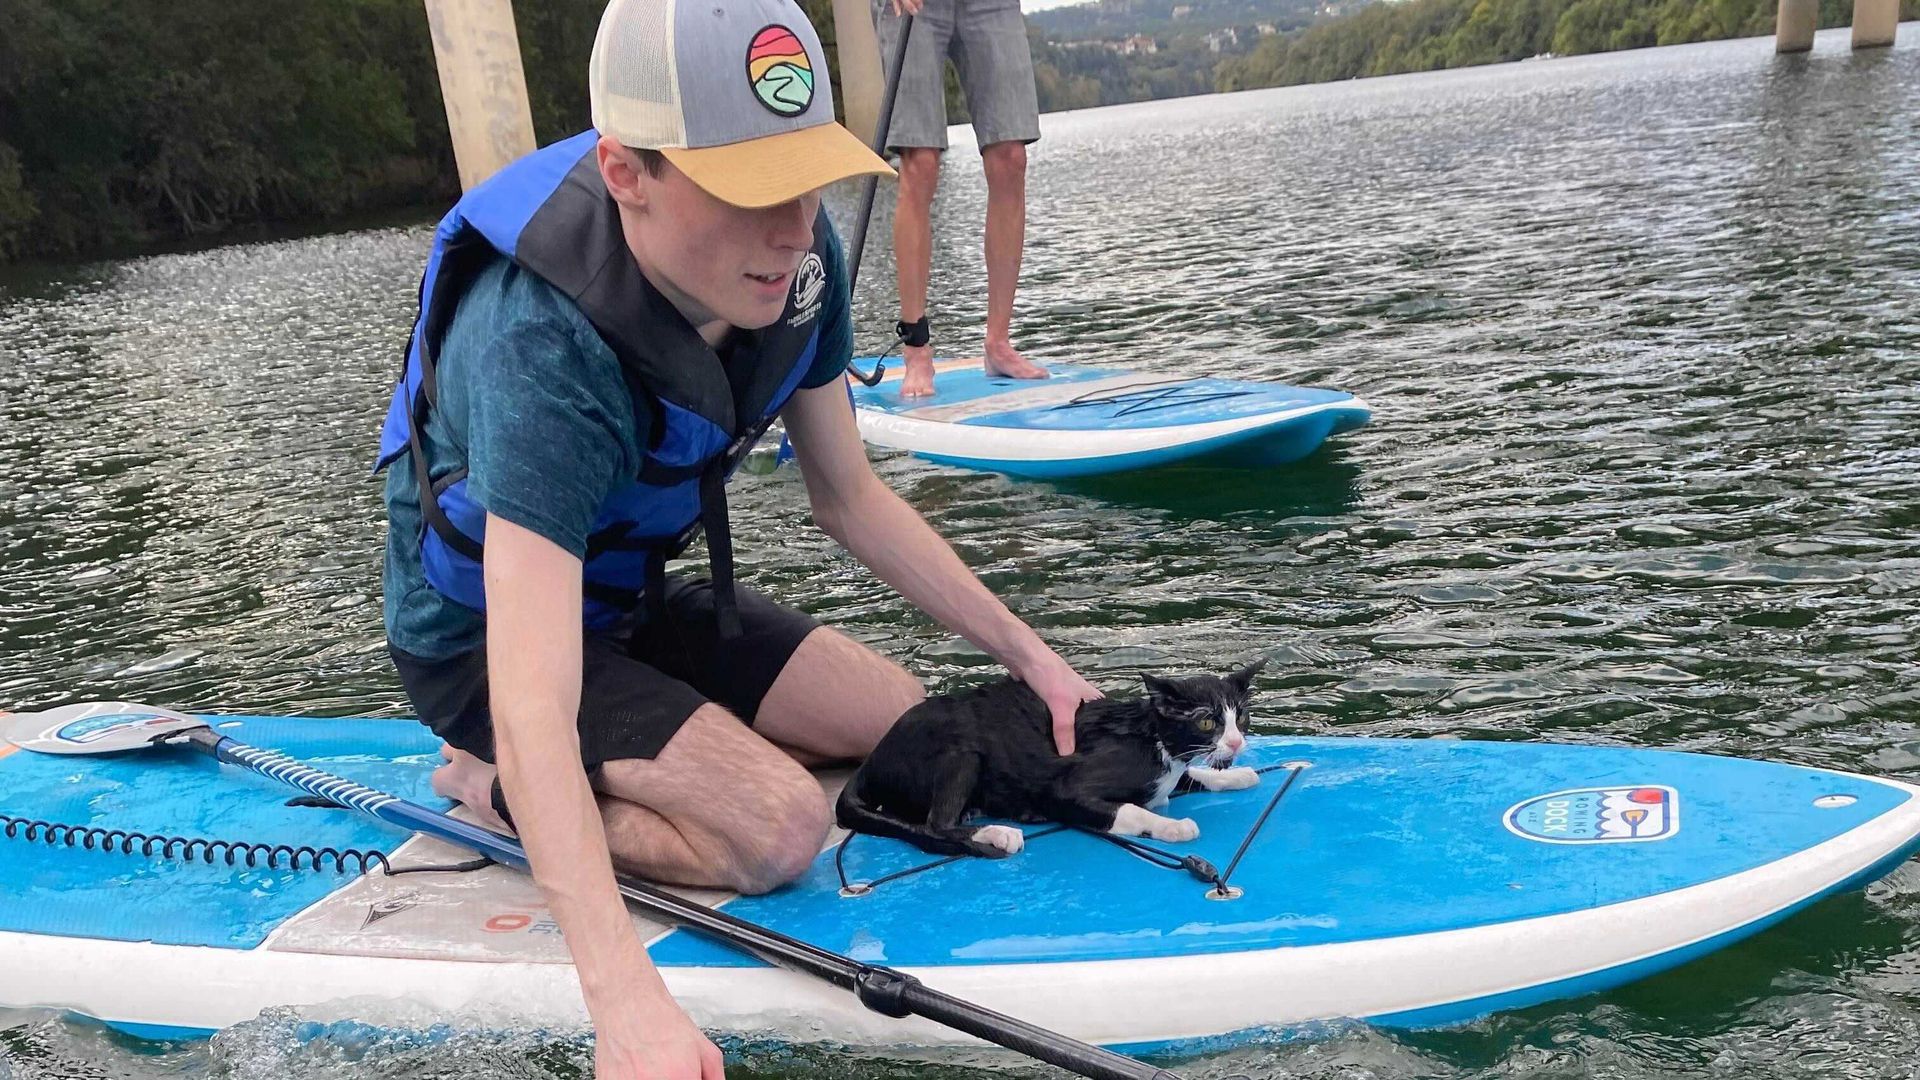 A photo of a man on a paddleboard holding onto a cat.